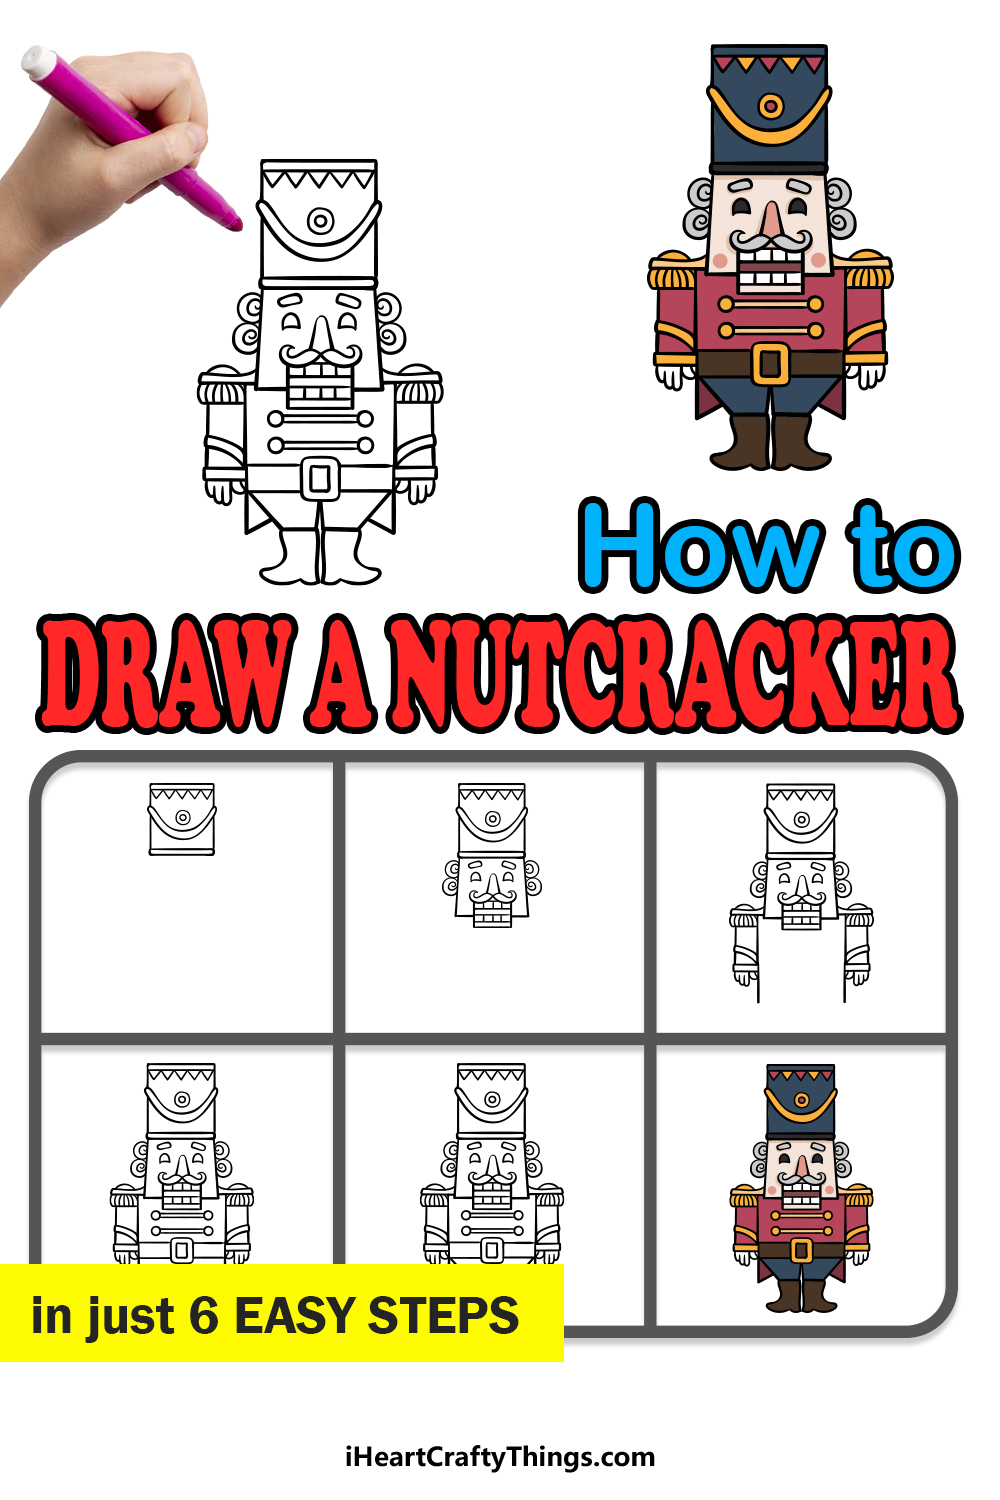 how to draw a Nutcracker in 6 easy steps